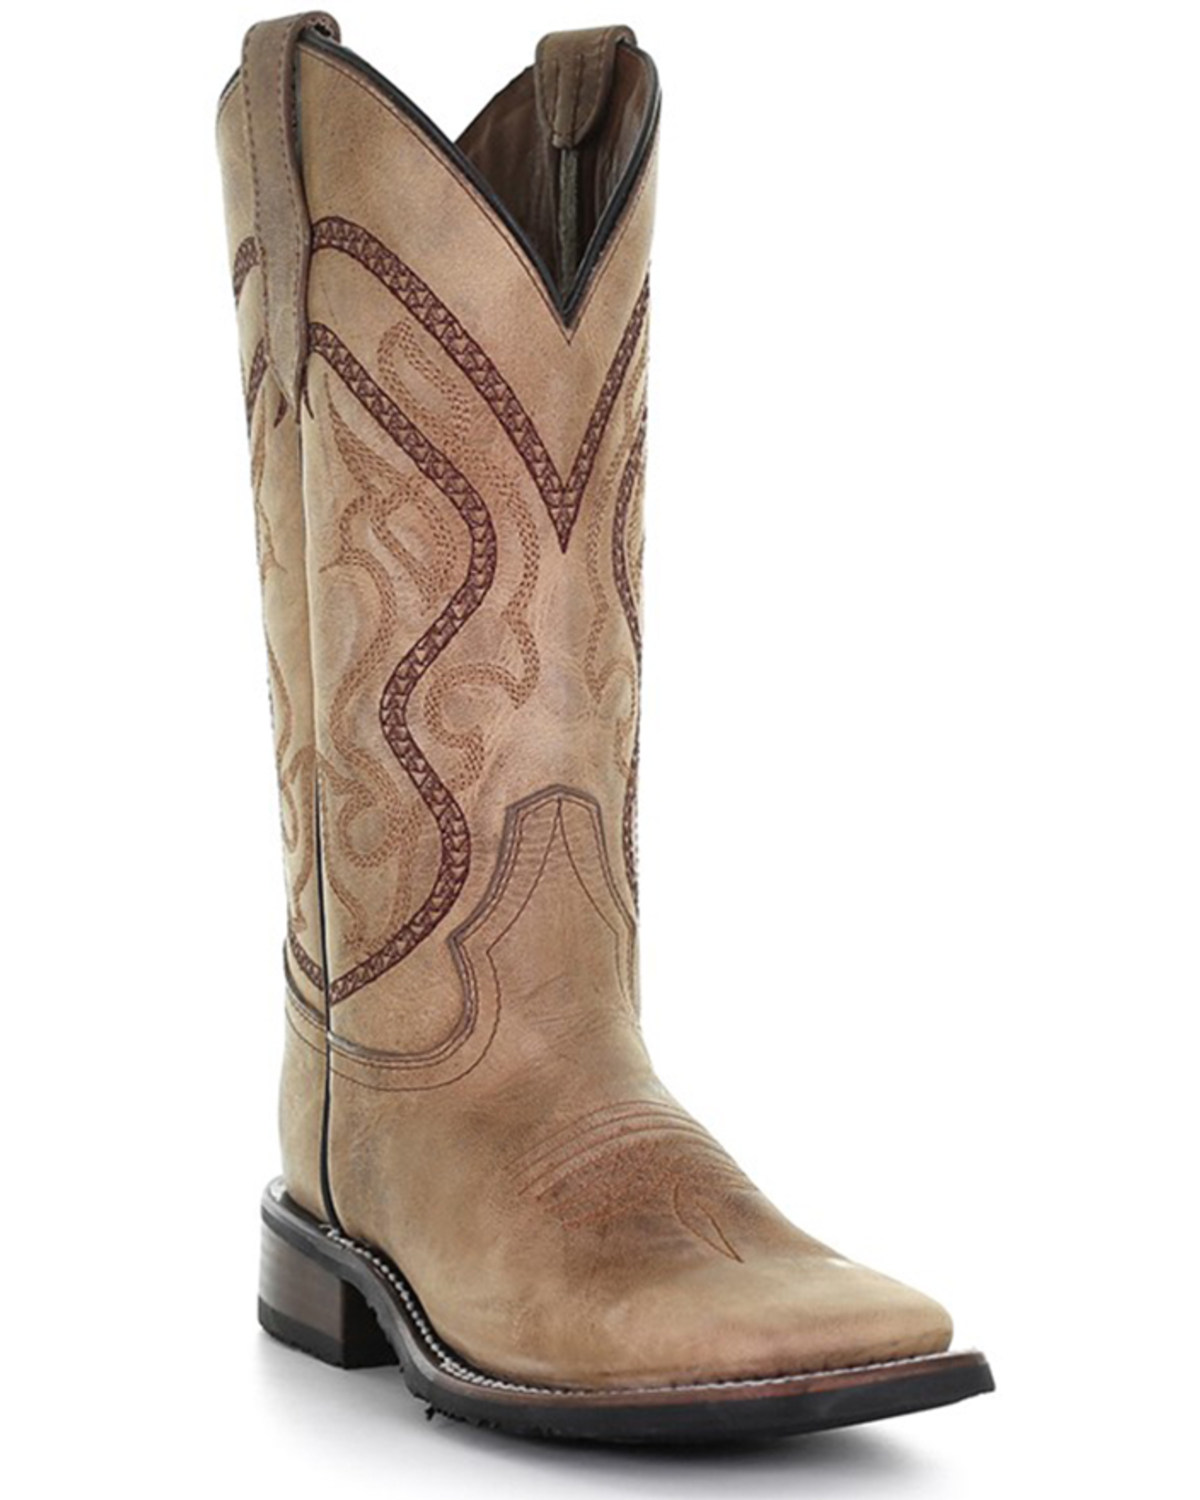 Corral Women's Saddle Embroidered Leather Western Boot - Broad Square Toe